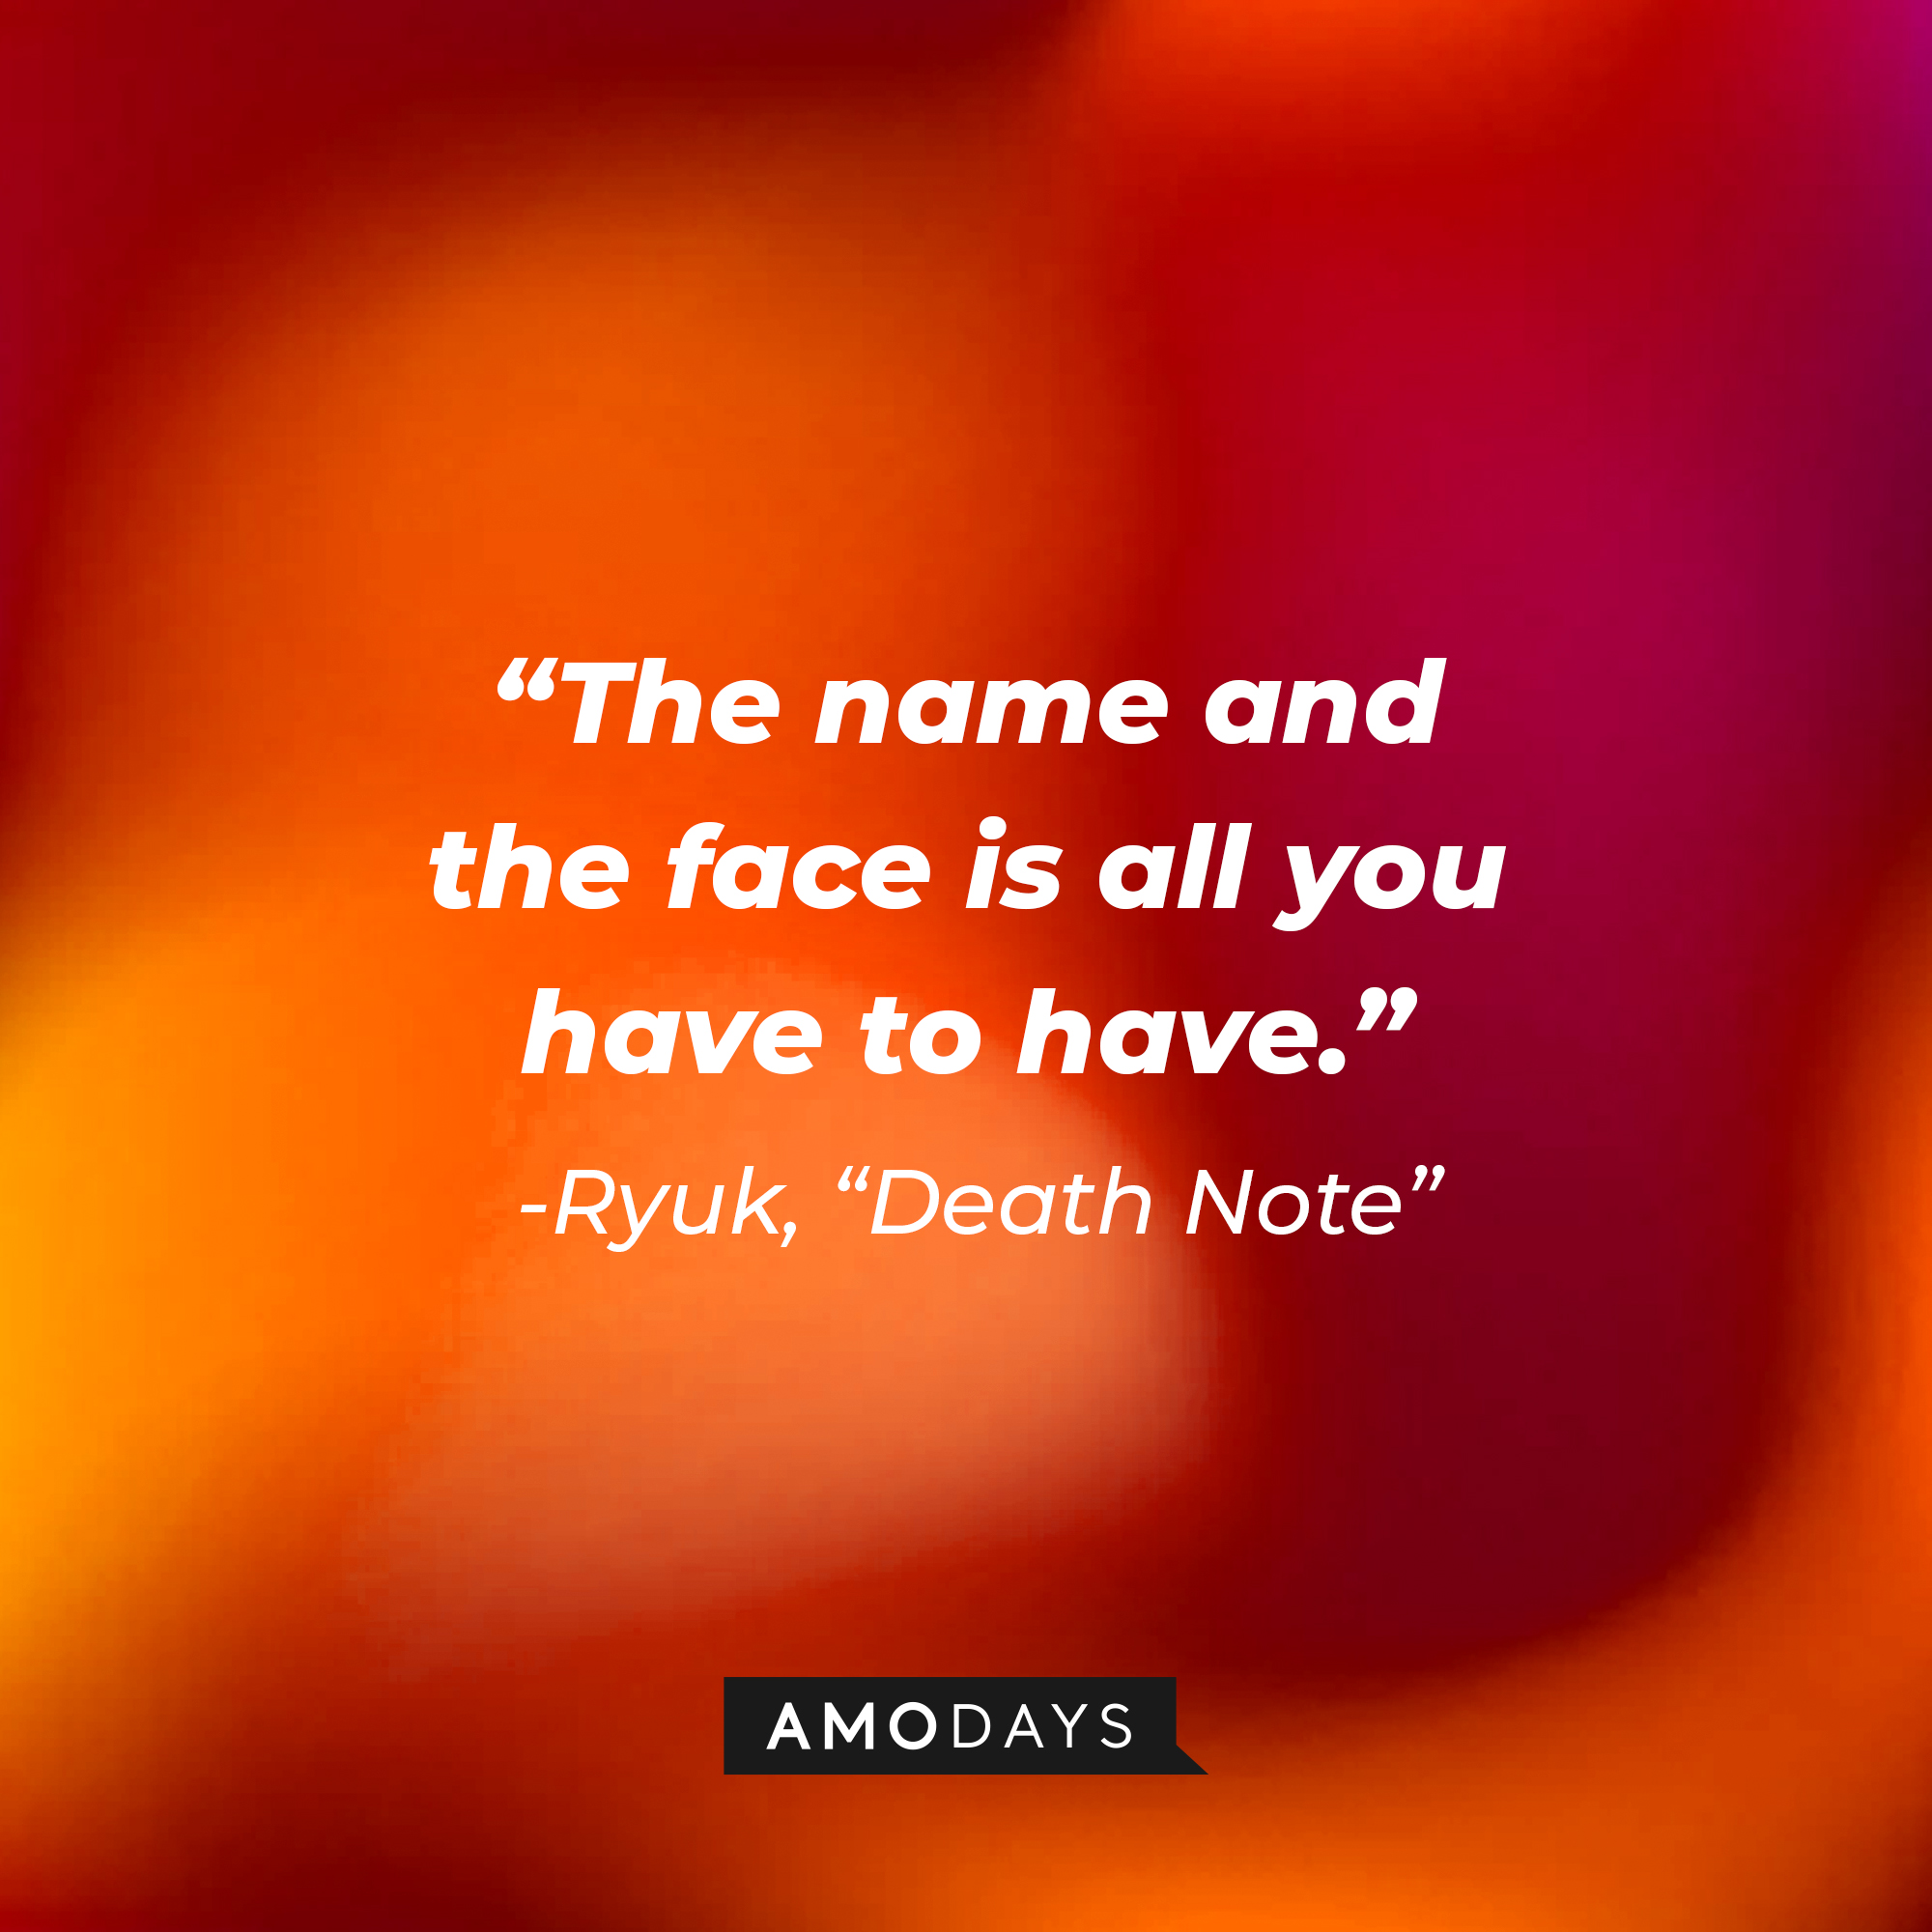 Ryuk's quote from "Death Note:" "The name and the face is all you have to have." | Source: AmoDays